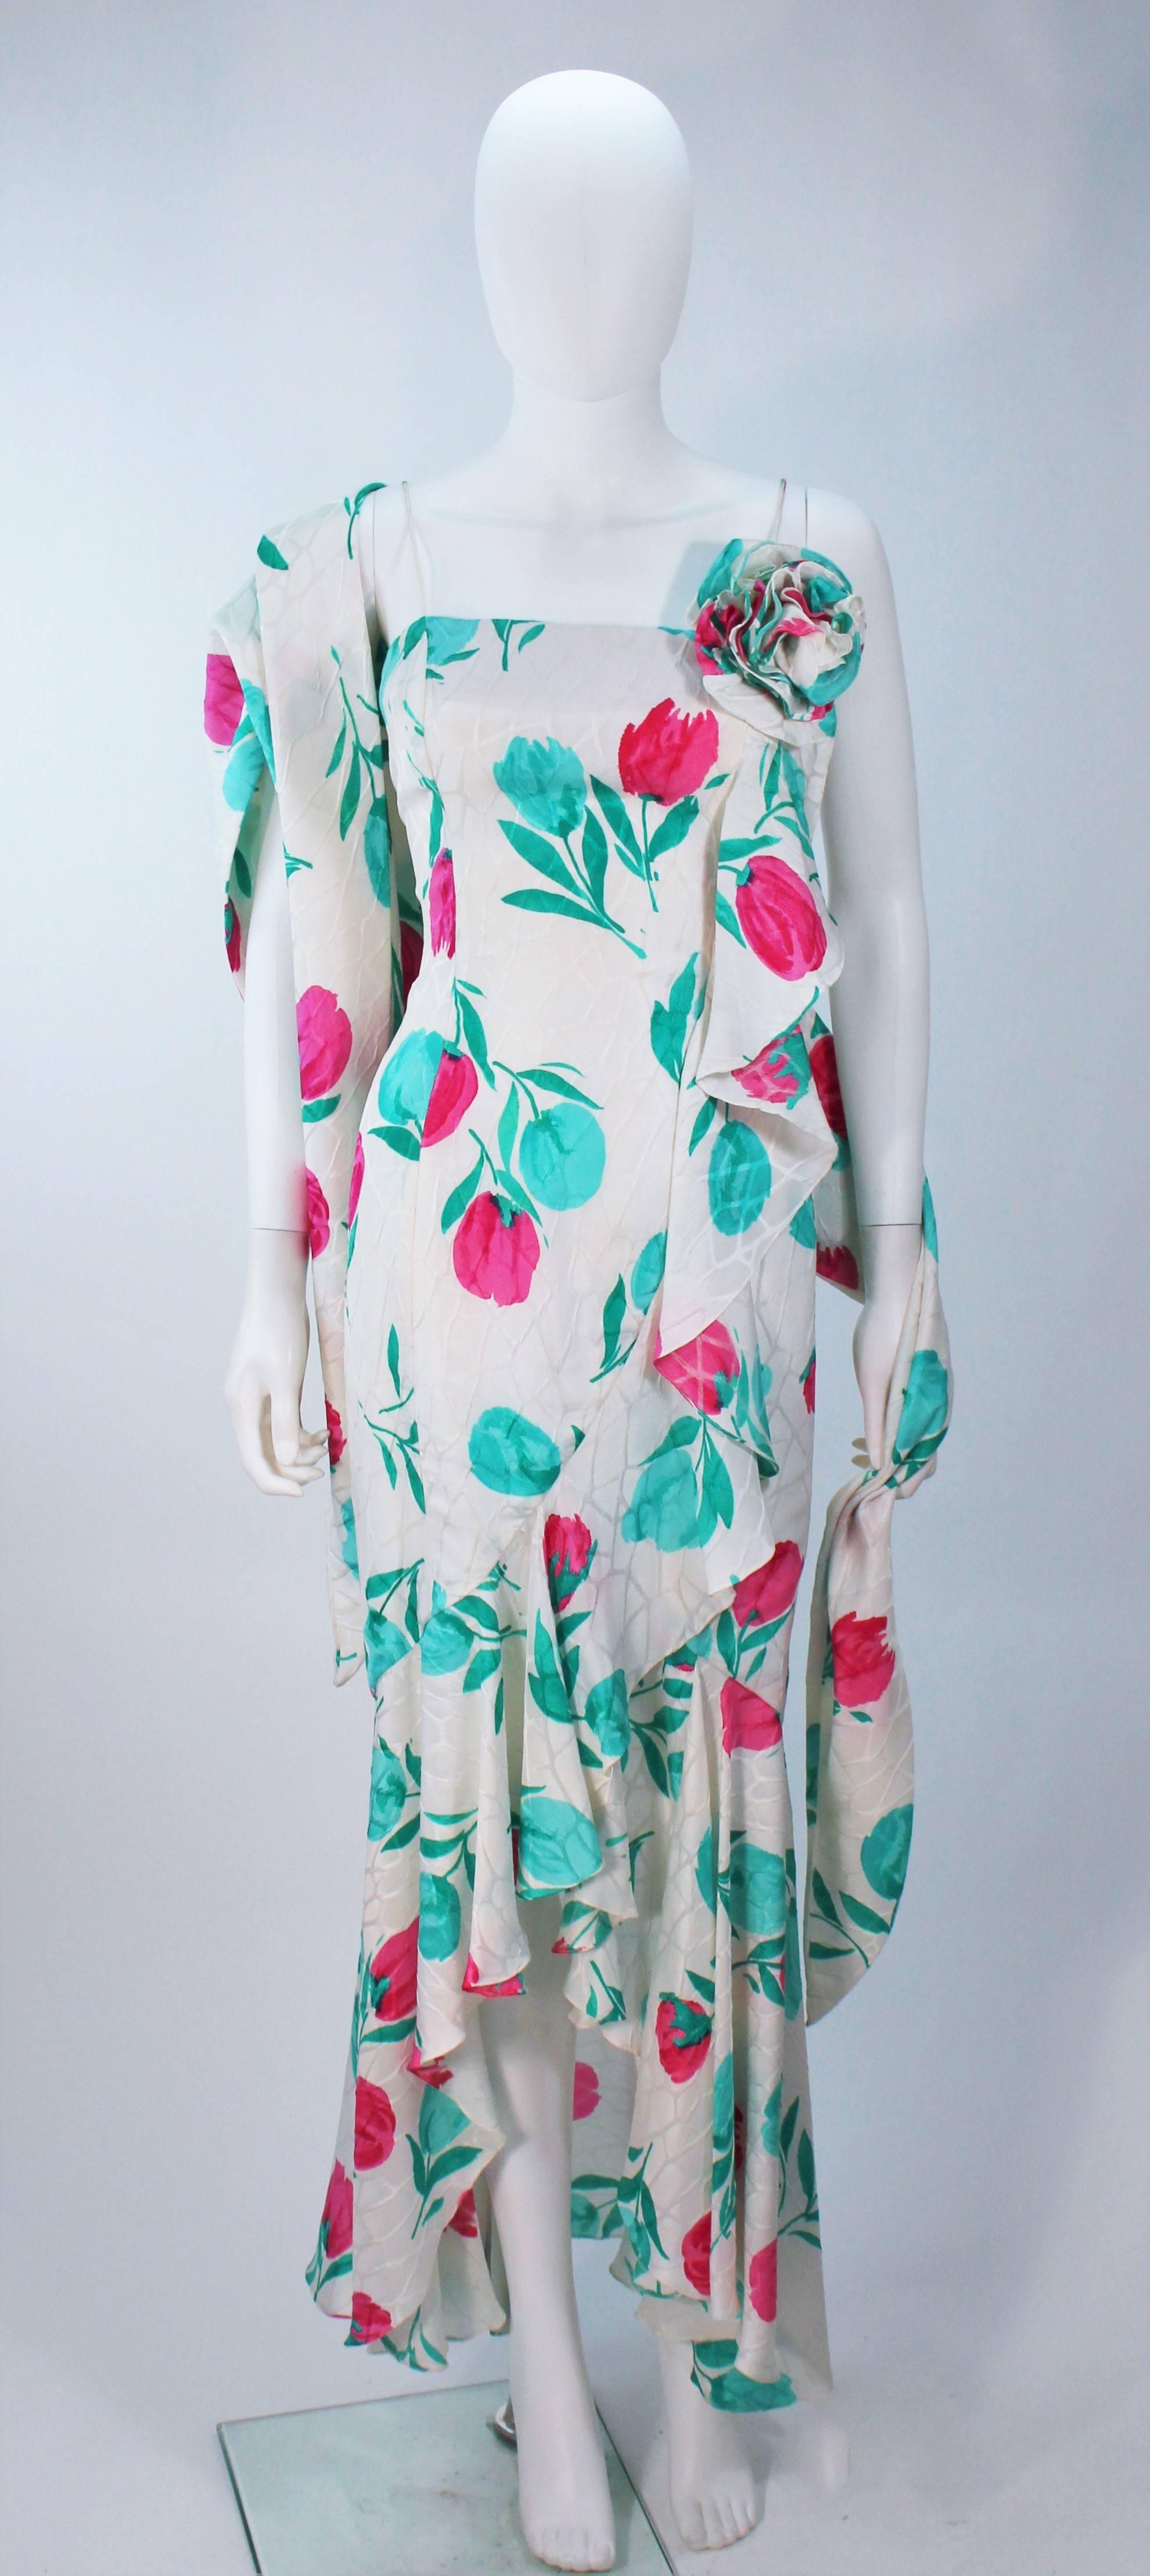  This Travilla gown is composed of an off-white silk with a turquoise and pink floral motif. Features a side draped ruffle with large flower. There is a center back zipper. Comes with wrap In excellent vintage condition. 

  **Please